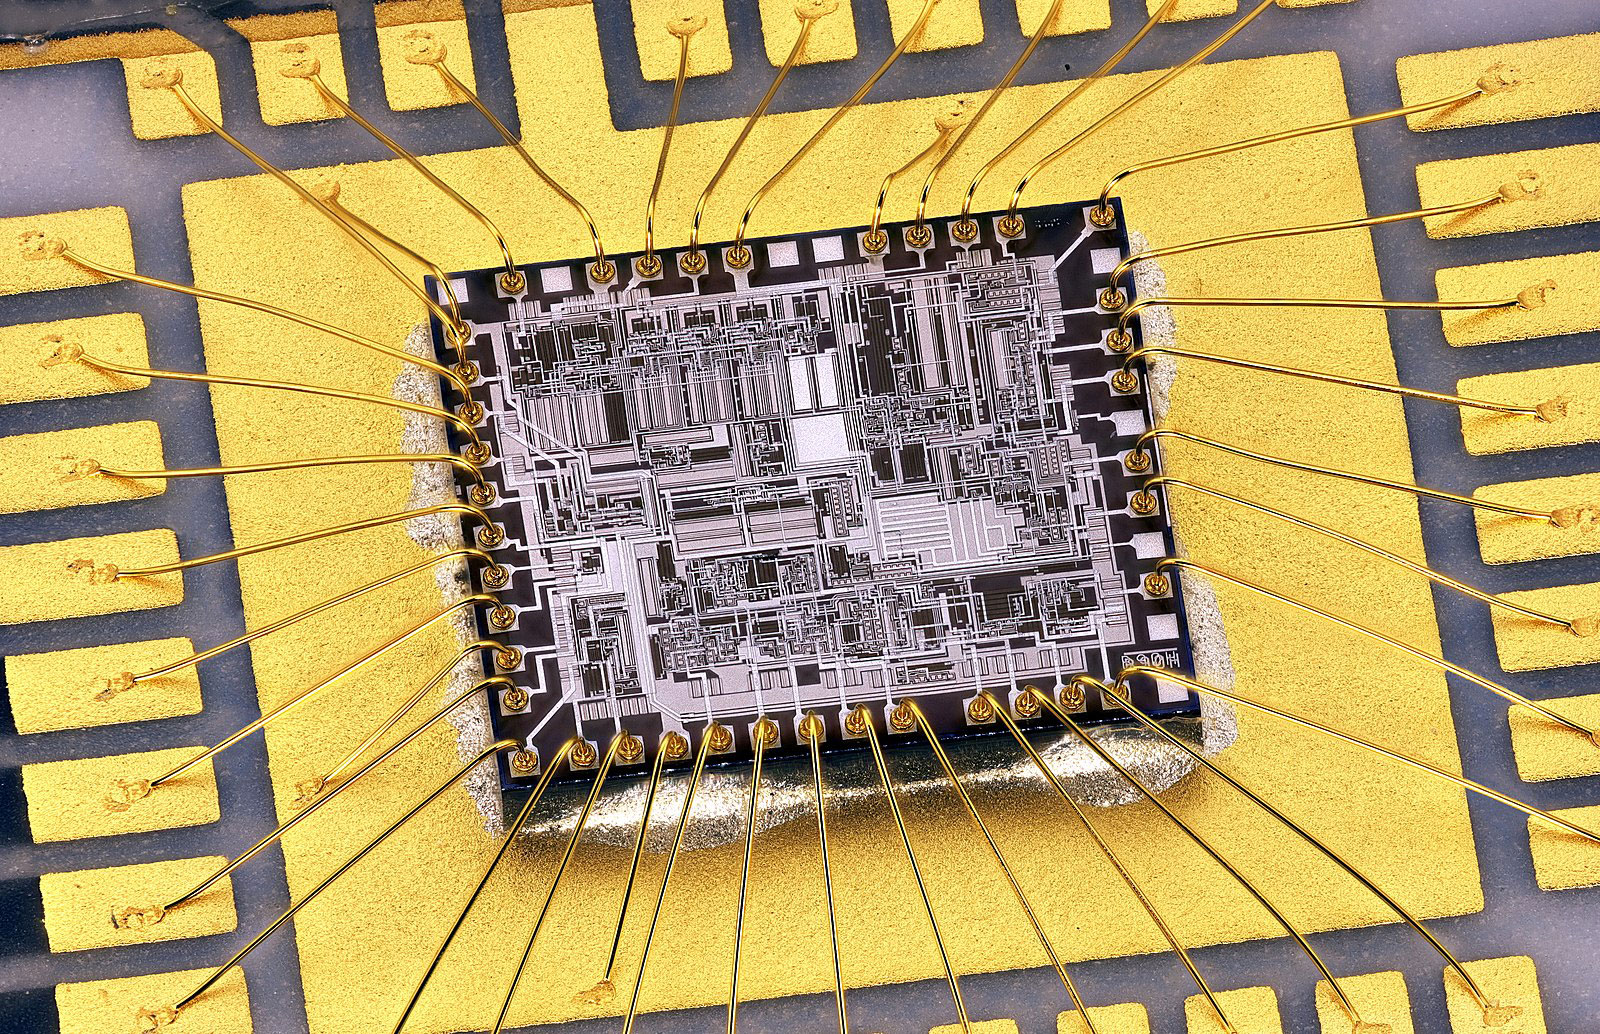 A wire-bonded Motorola GM350 transceiver. Note the gold wires